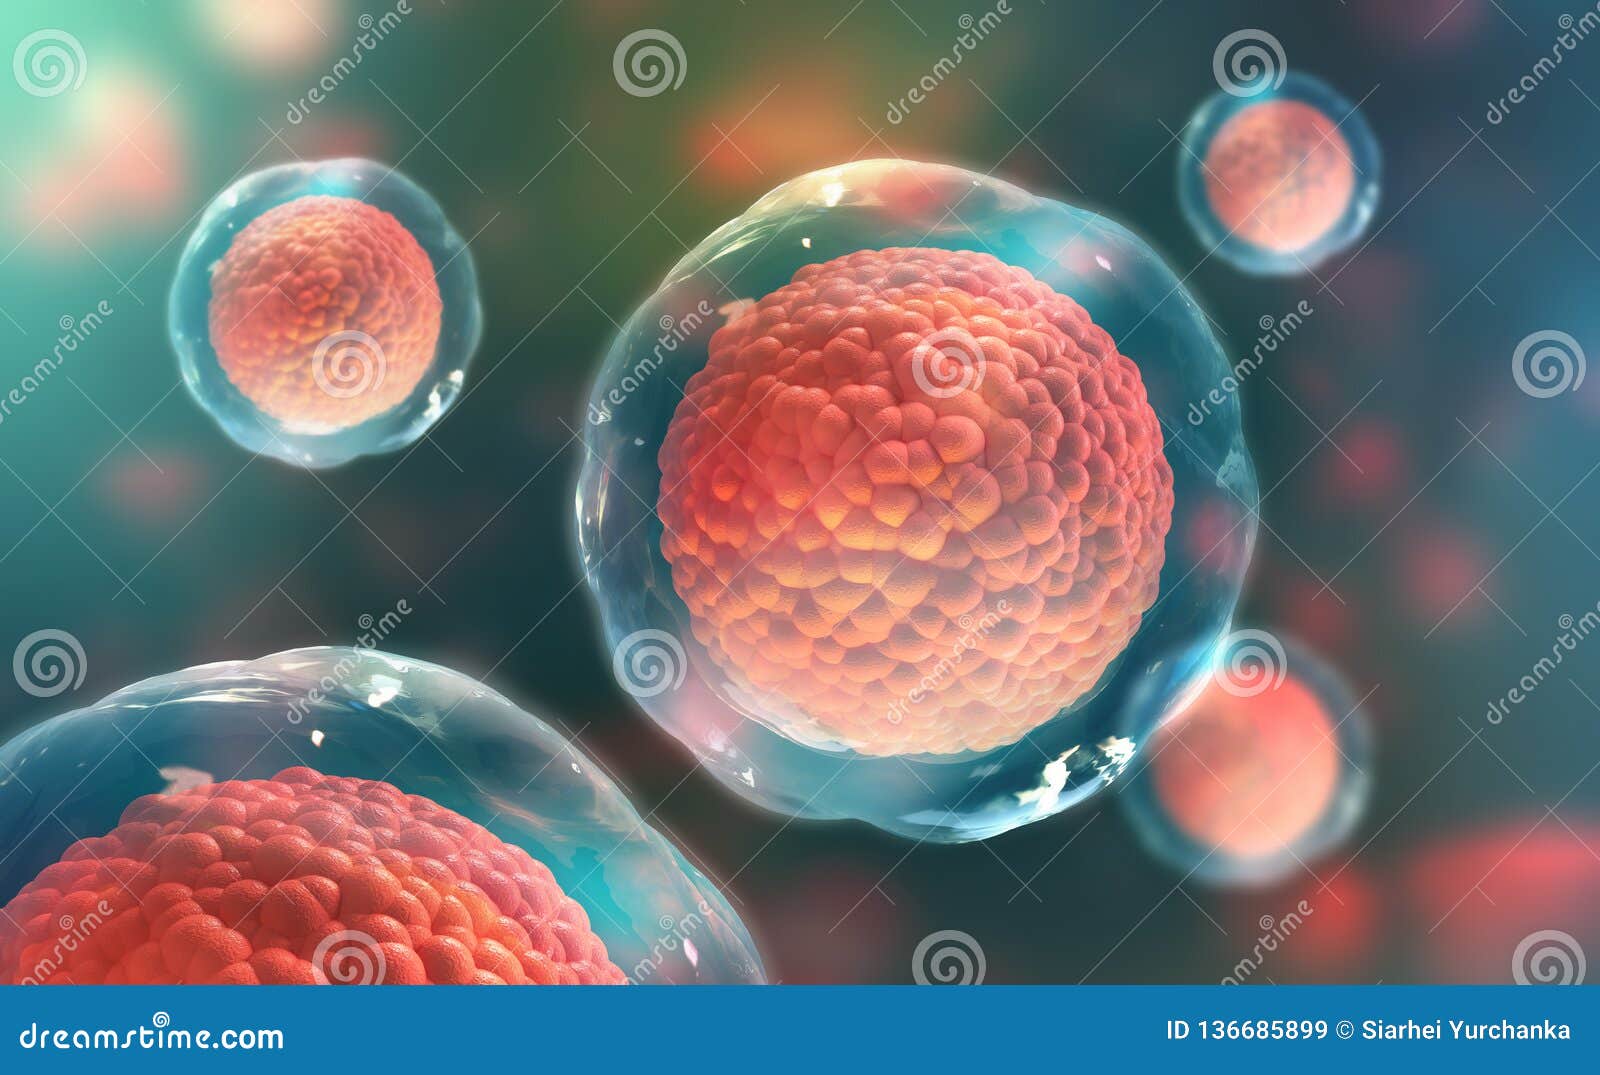 cells of the body under a microscope. research of stem cells